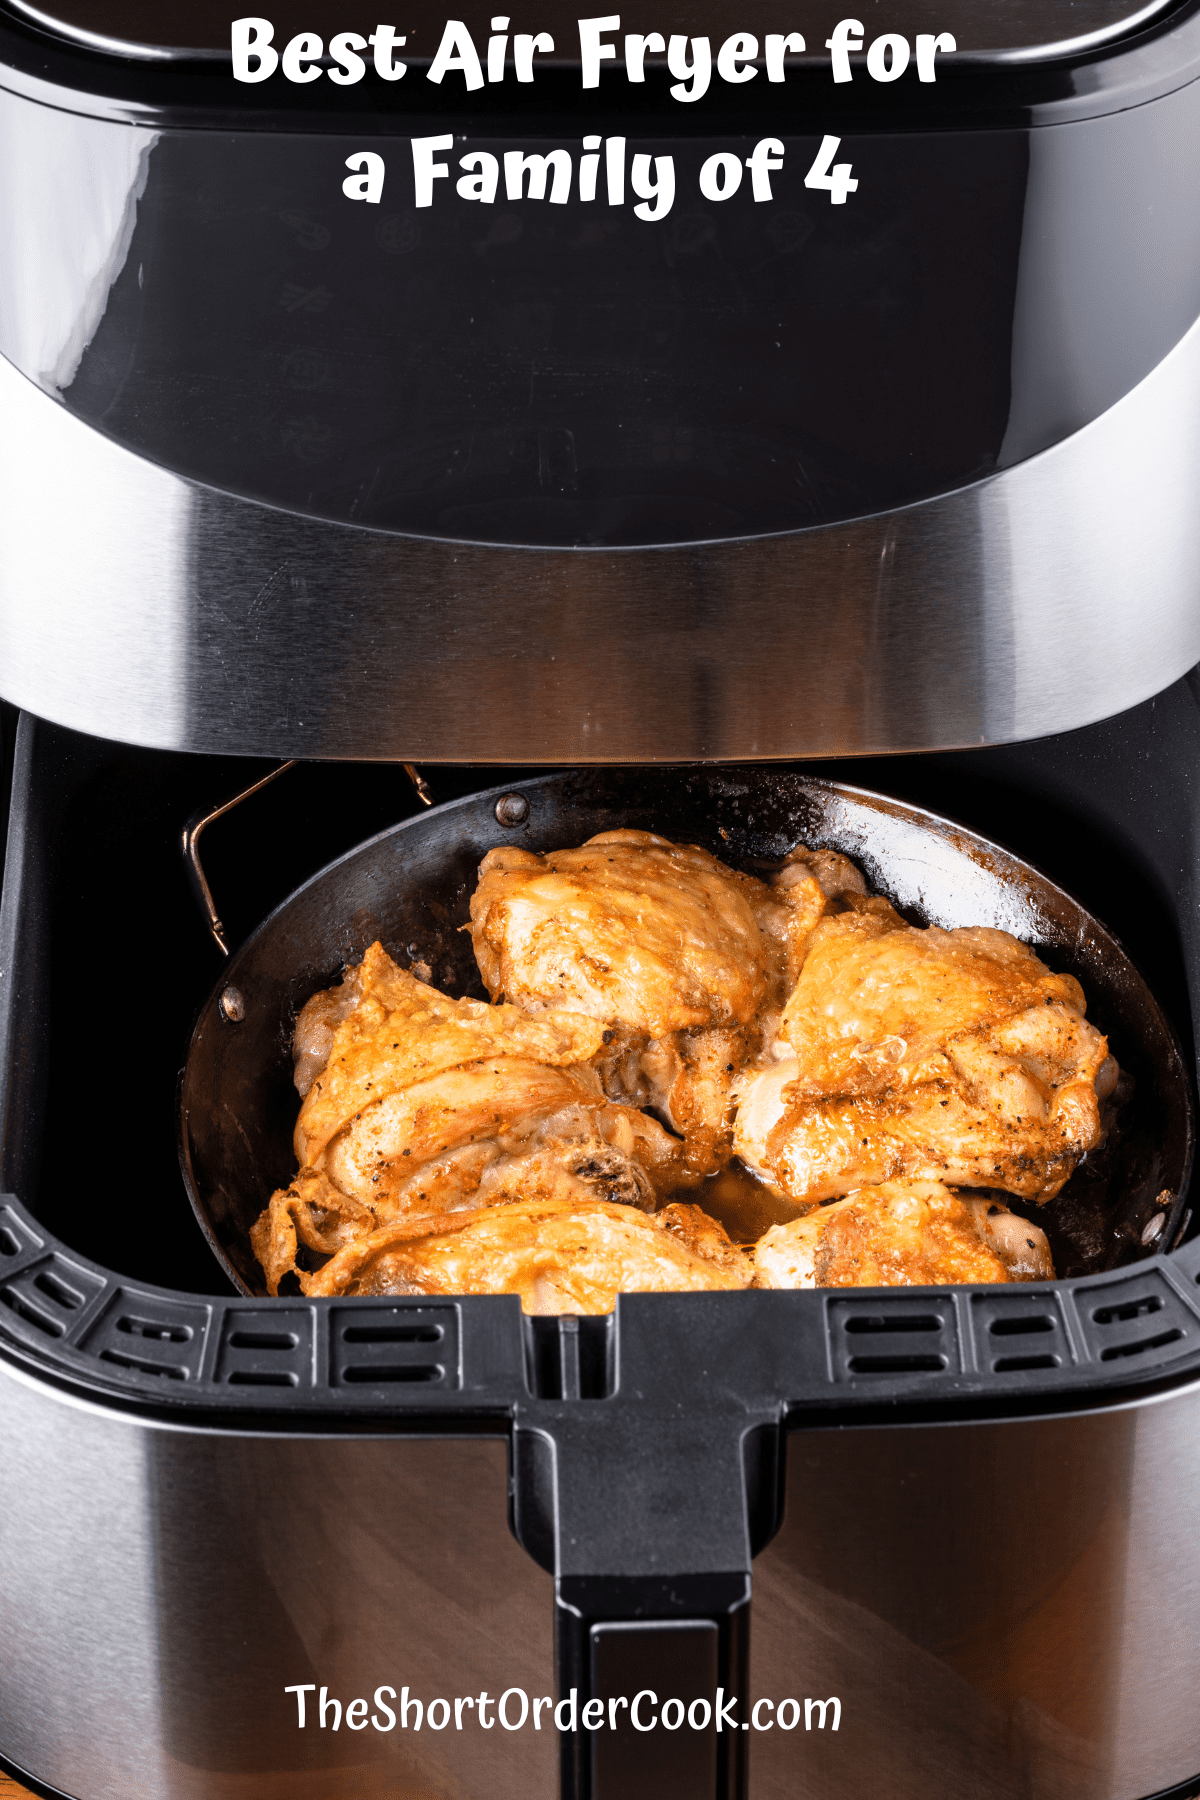 Best Air Fryer for a Family of 4 is this large capacity Ninja model.